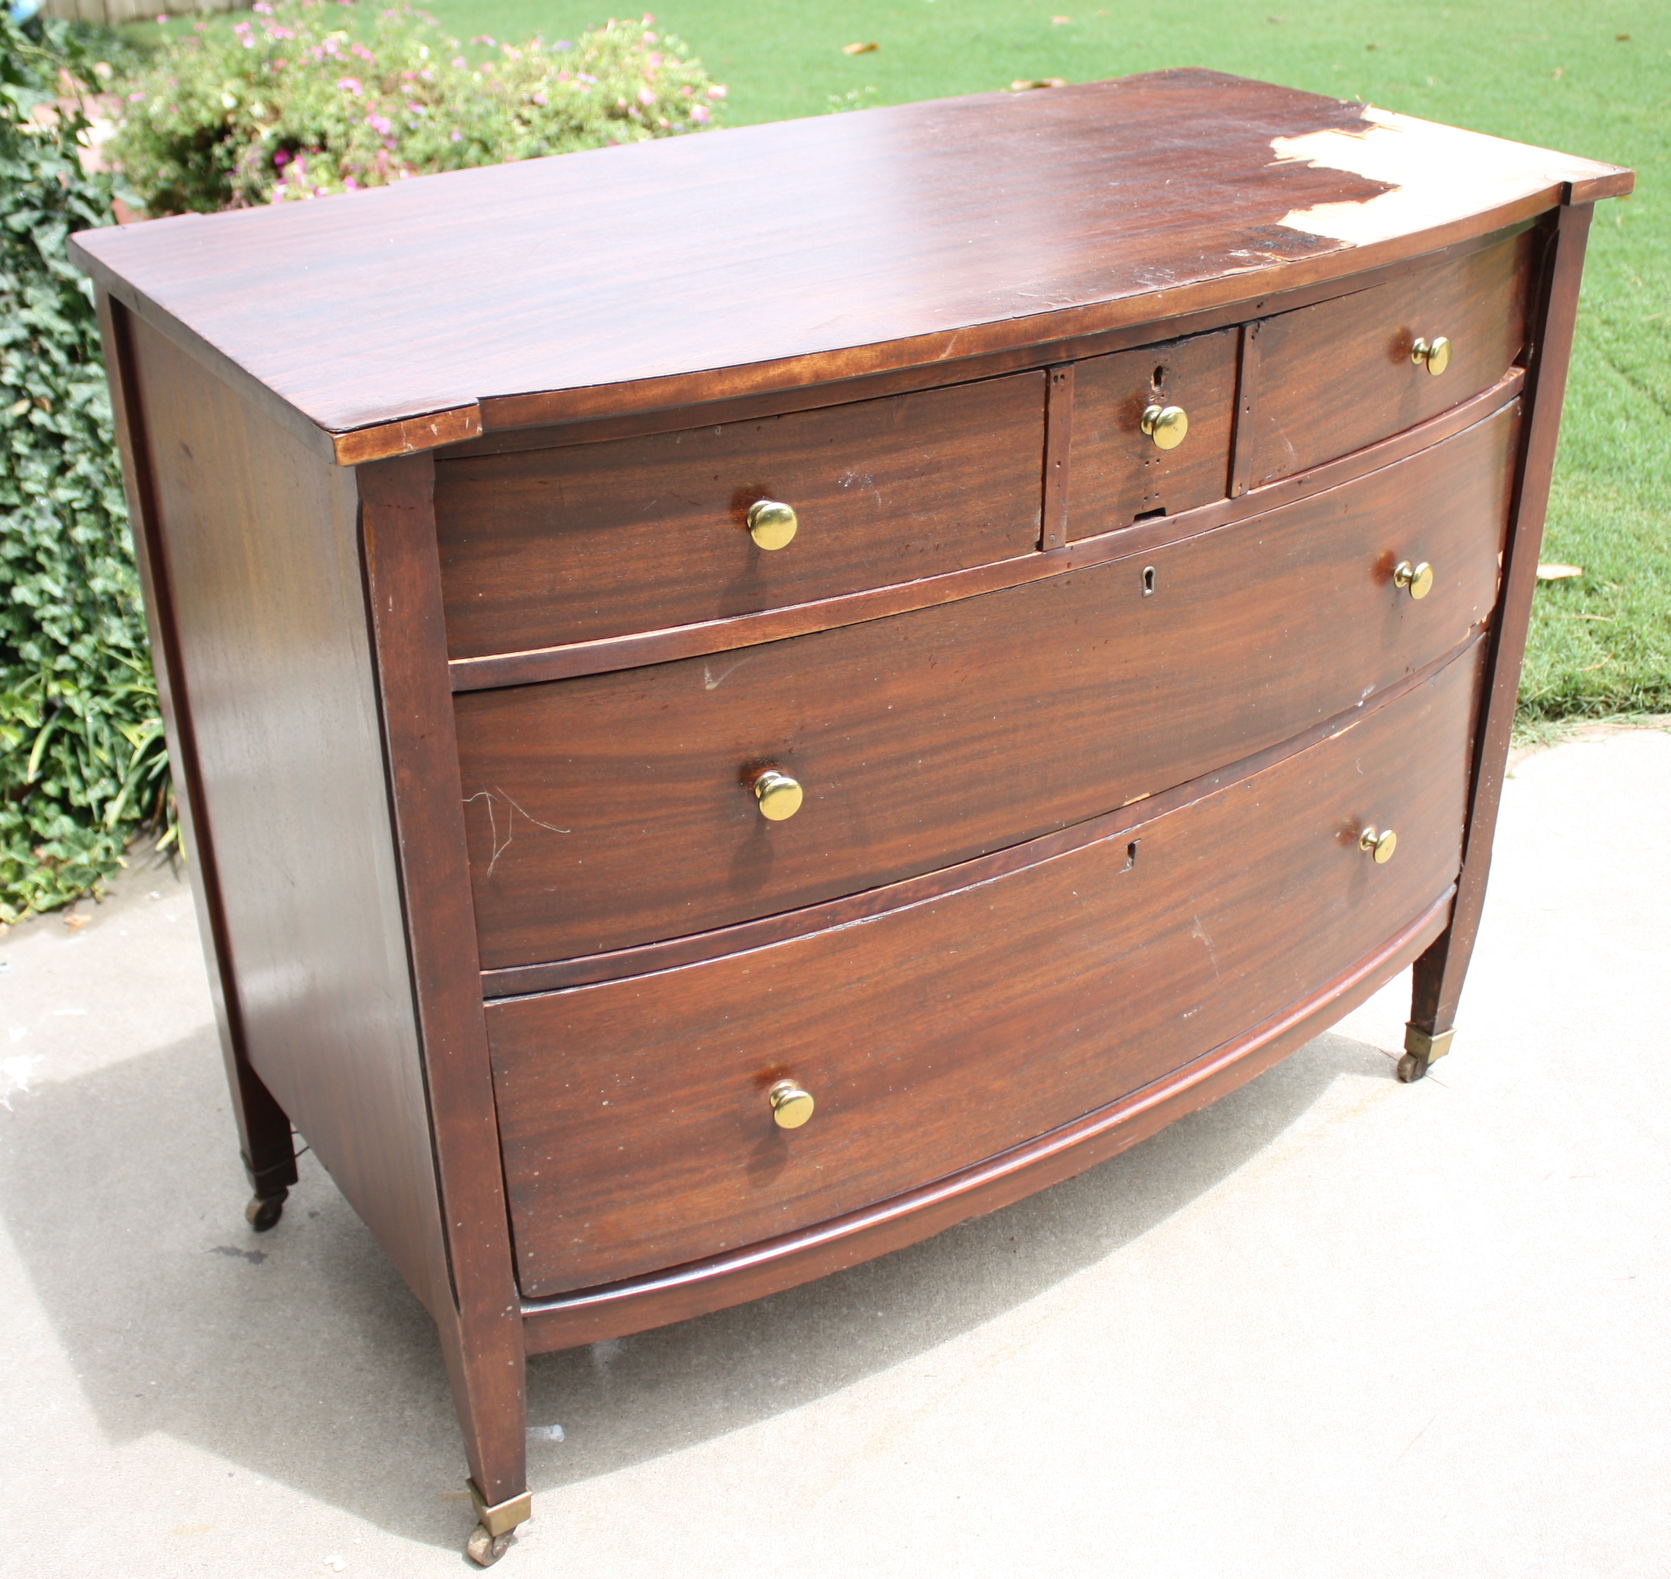 Antique Mahogany Dresser Makeover Beckwith S Treasures